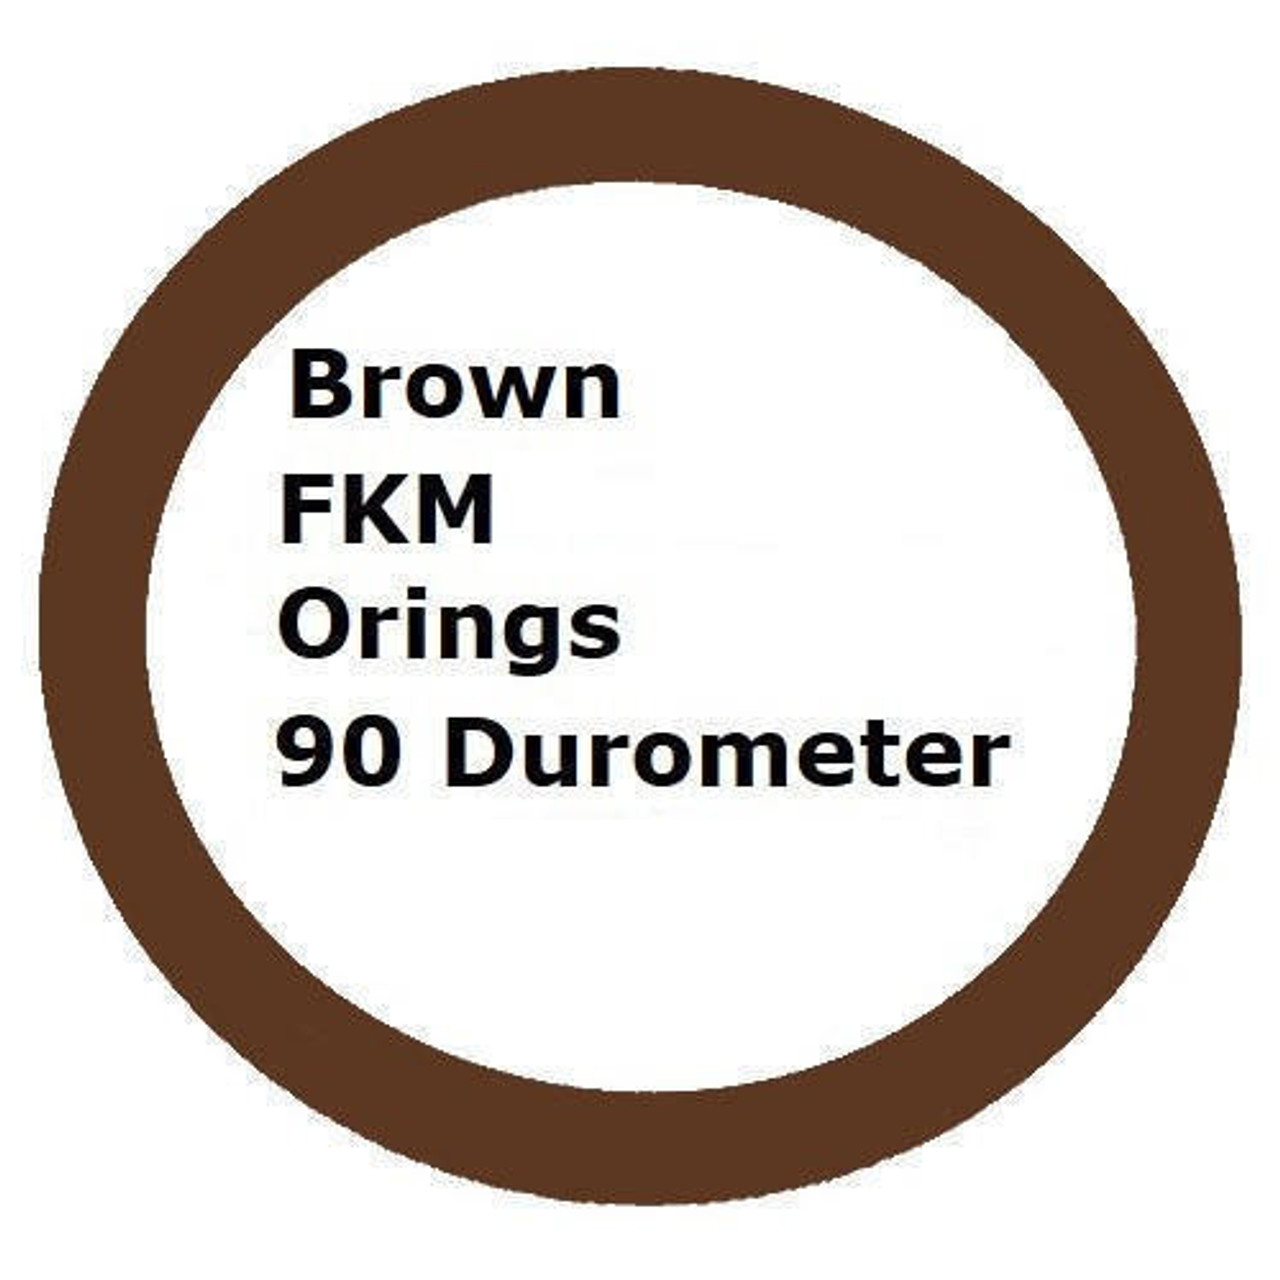 FKM 90 Brown Orings Size 261 Price for 1 pc